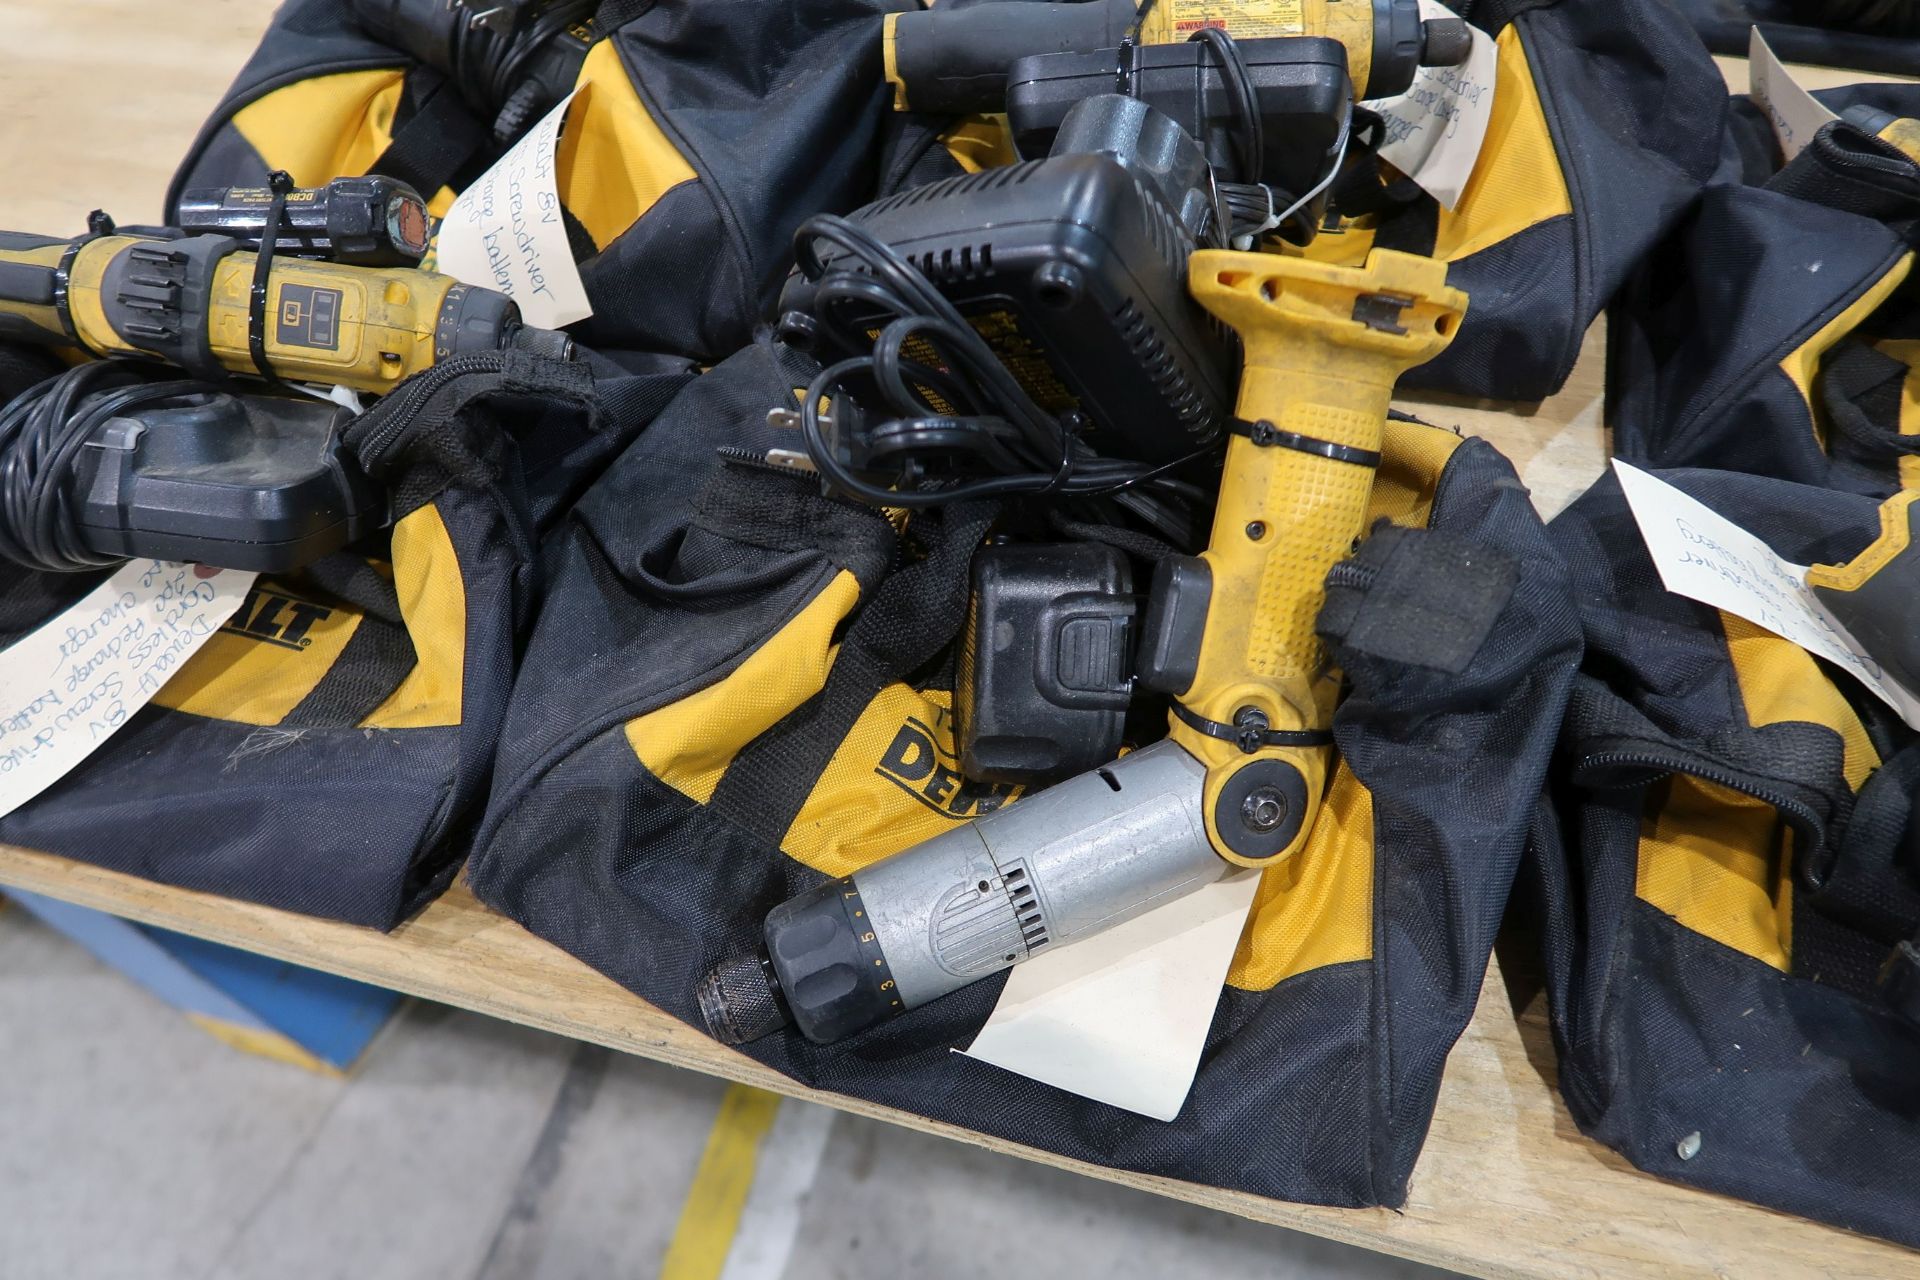 MISCELLANEOUS DEWALT CORDLESS SCREWDRIVERS AND DRILL DRIVERS WITH CHARGERS - Image 2 of 3